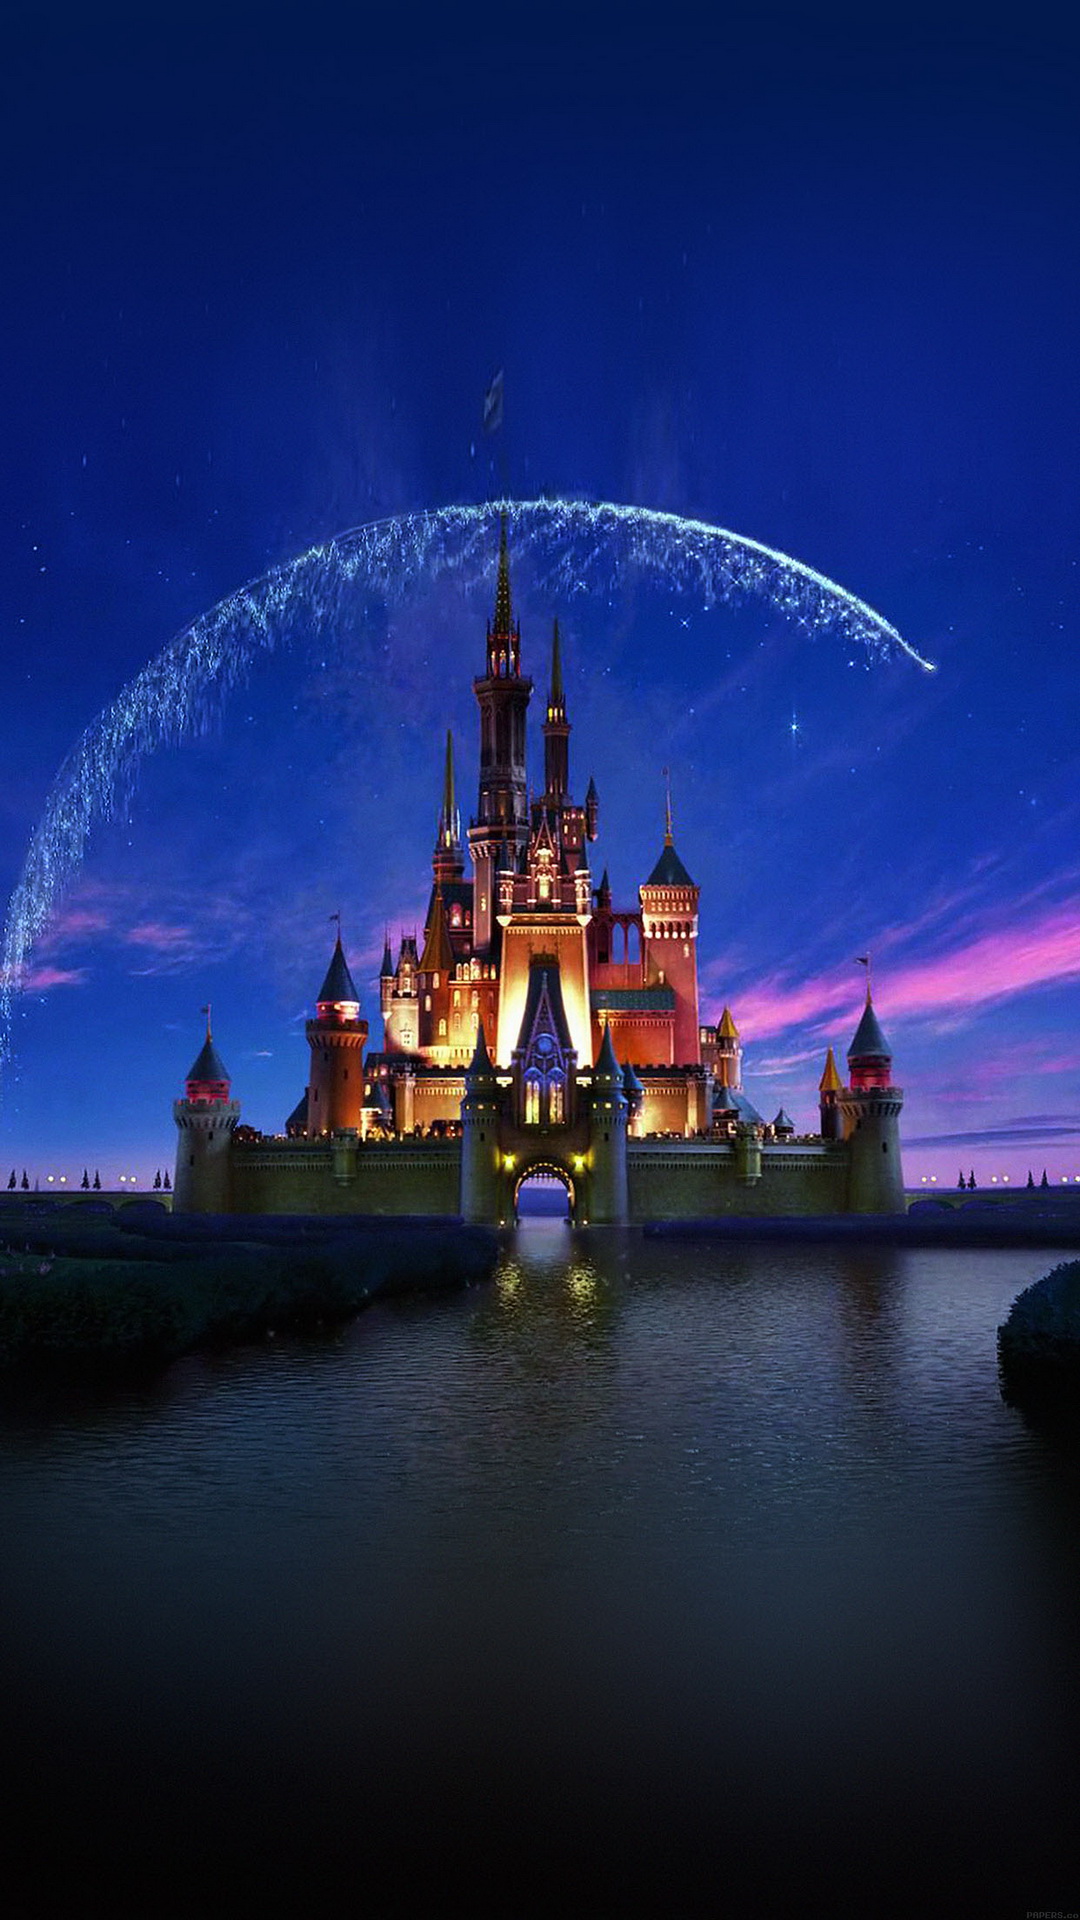 Disney Castle   Top 10 HTC One M9 wallpapers free download